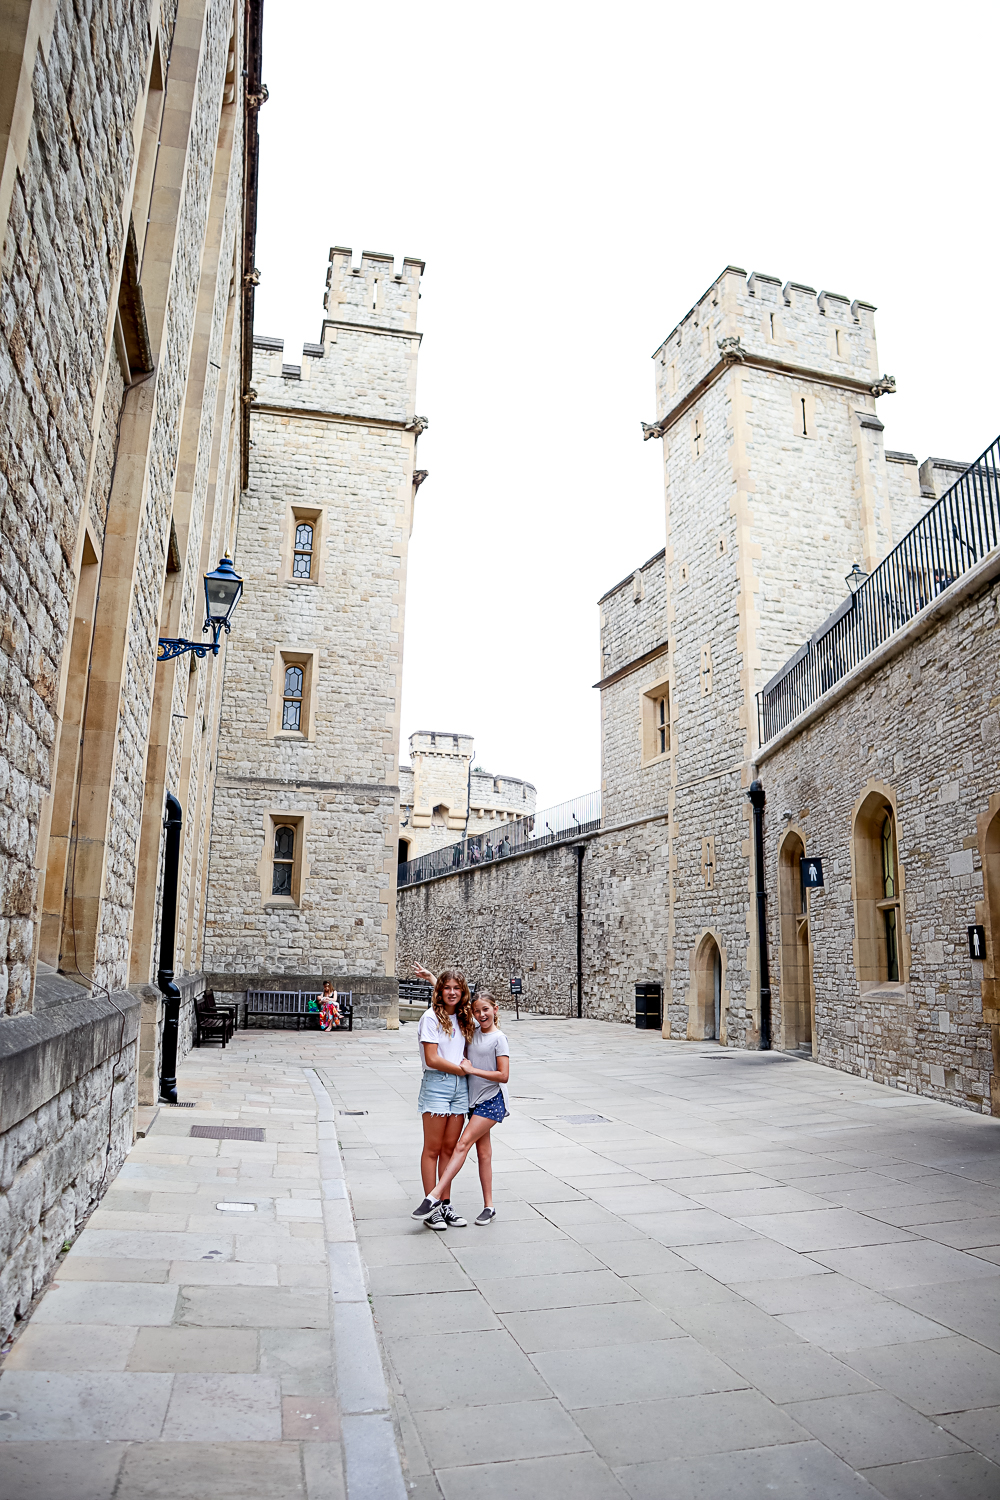 Pacific Globetrotters, budget family travel blog, shares 4 day itinerary in London with kids. Tower Of London